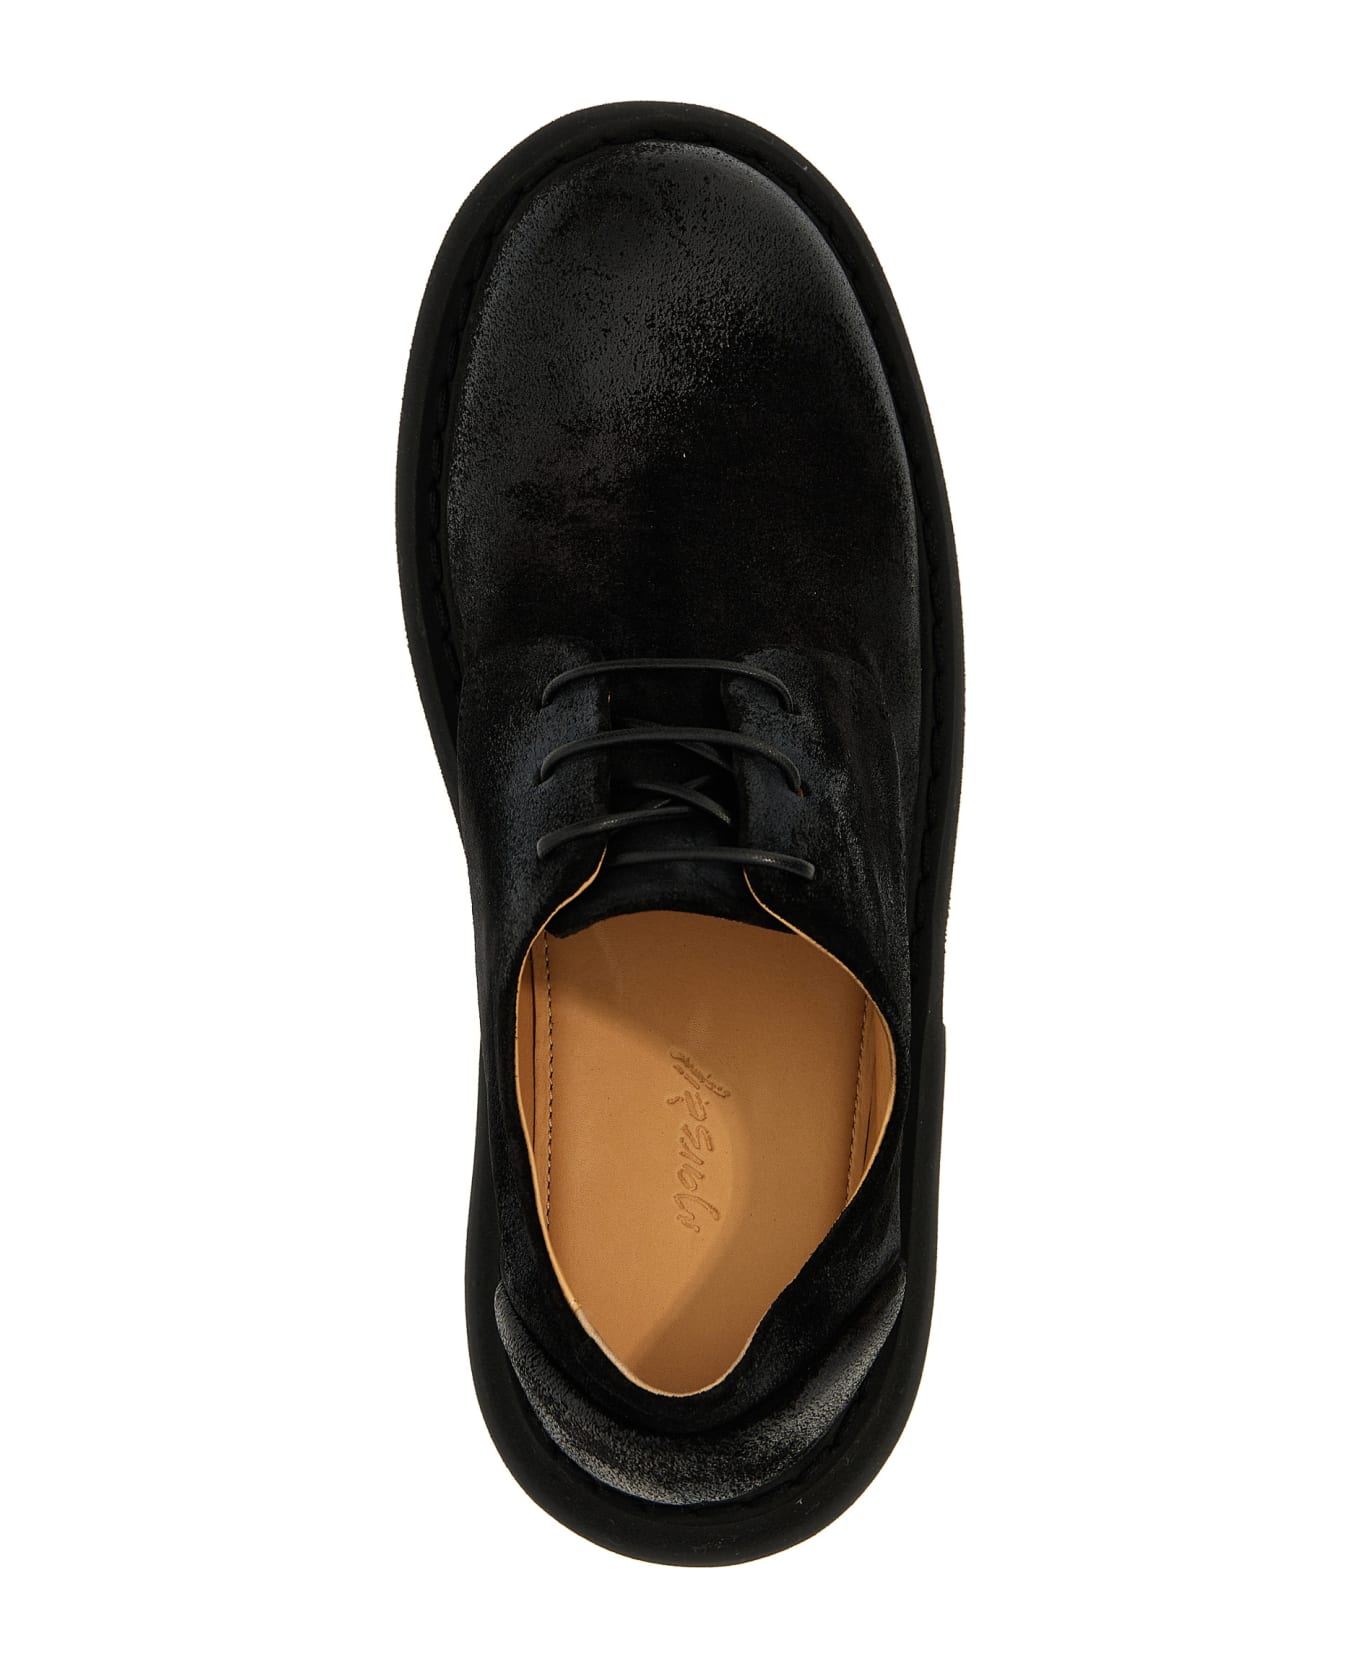 Marsell 'spalla' Lace Up Shoes - Black   ローファー＆デッキシューズ